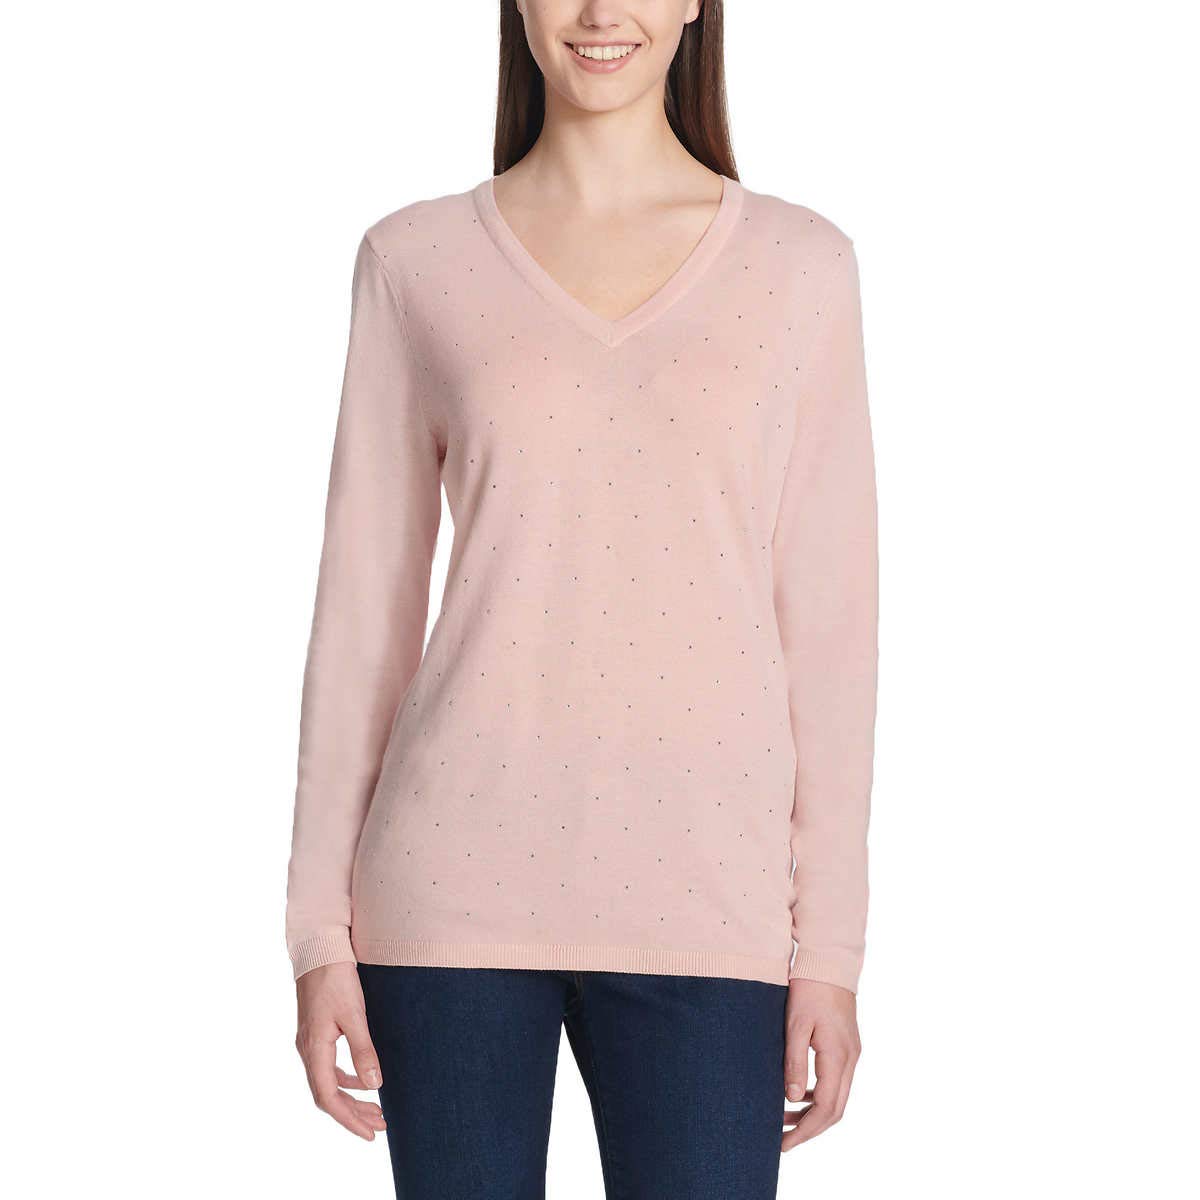 Dkny Womens Embellished Sweater